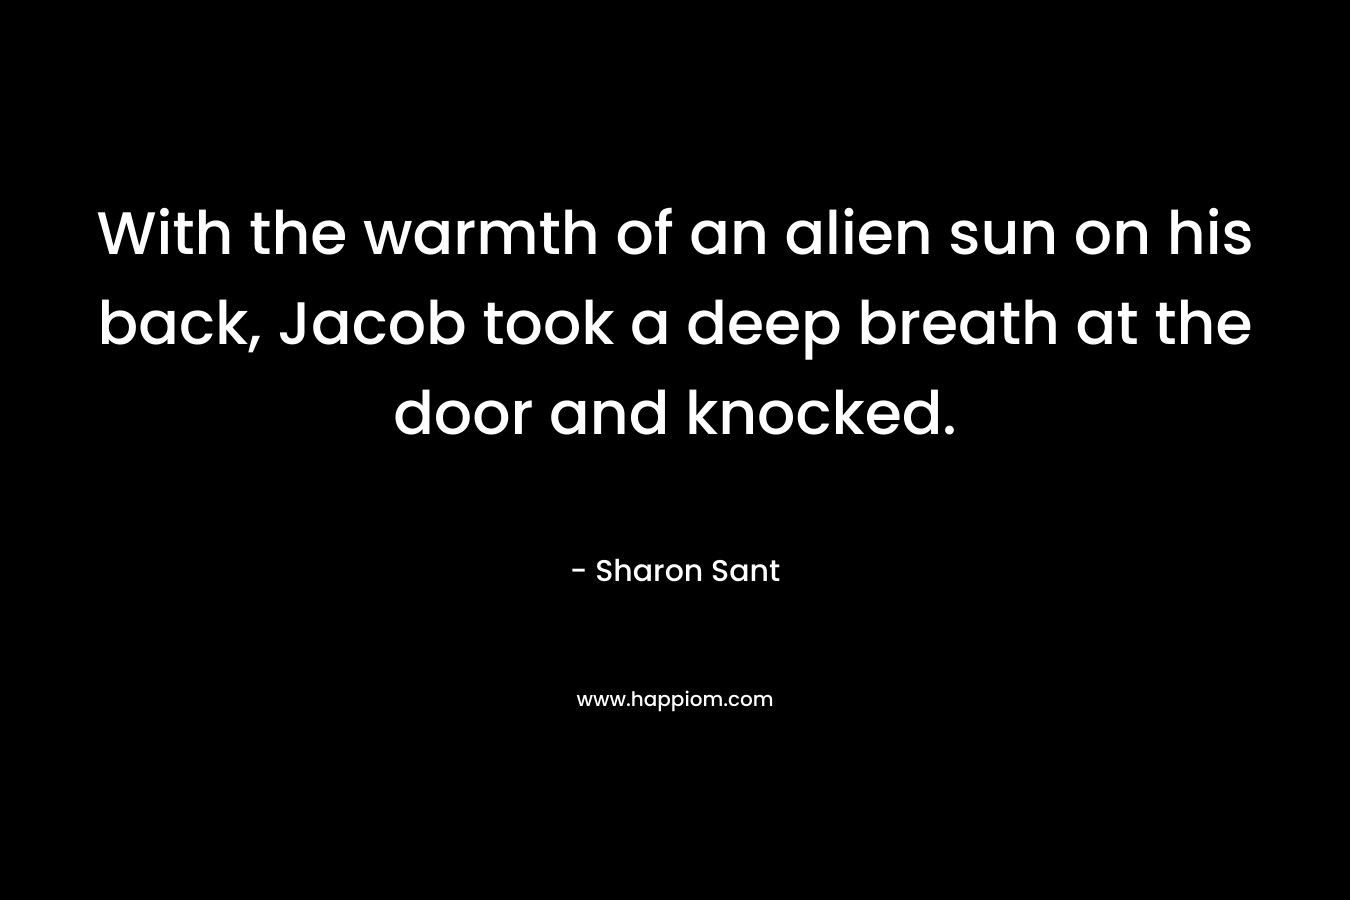 With the warmth of an alien sun on his back, Jacob took a deep breath at the door and knocked.